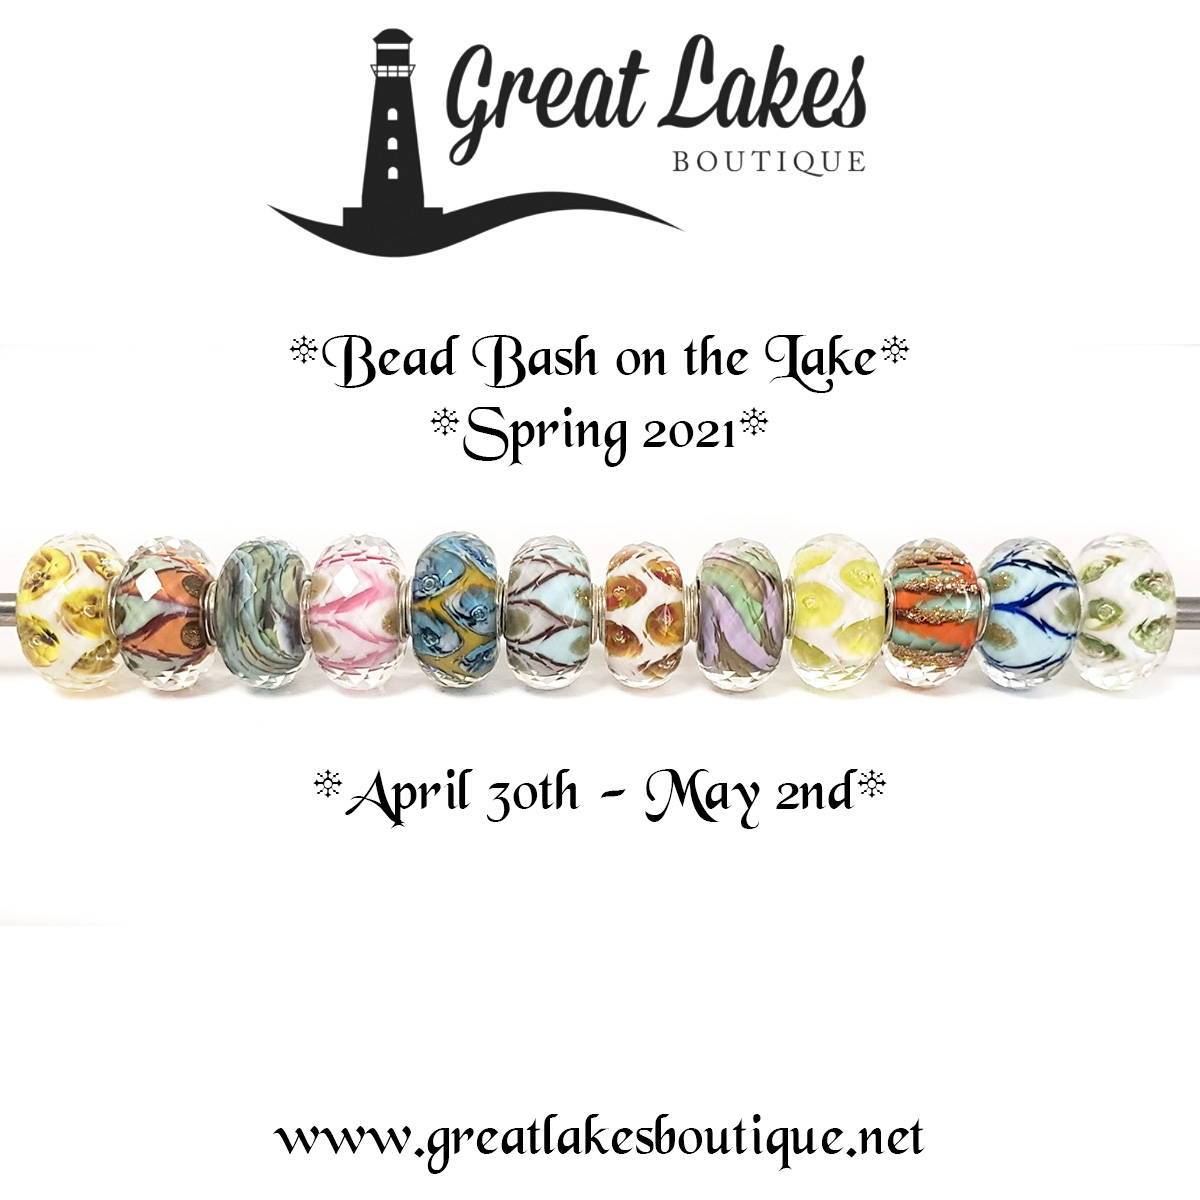 Trollbeads Faceted Uniques for Bead Bash on the Lake Spring 2021